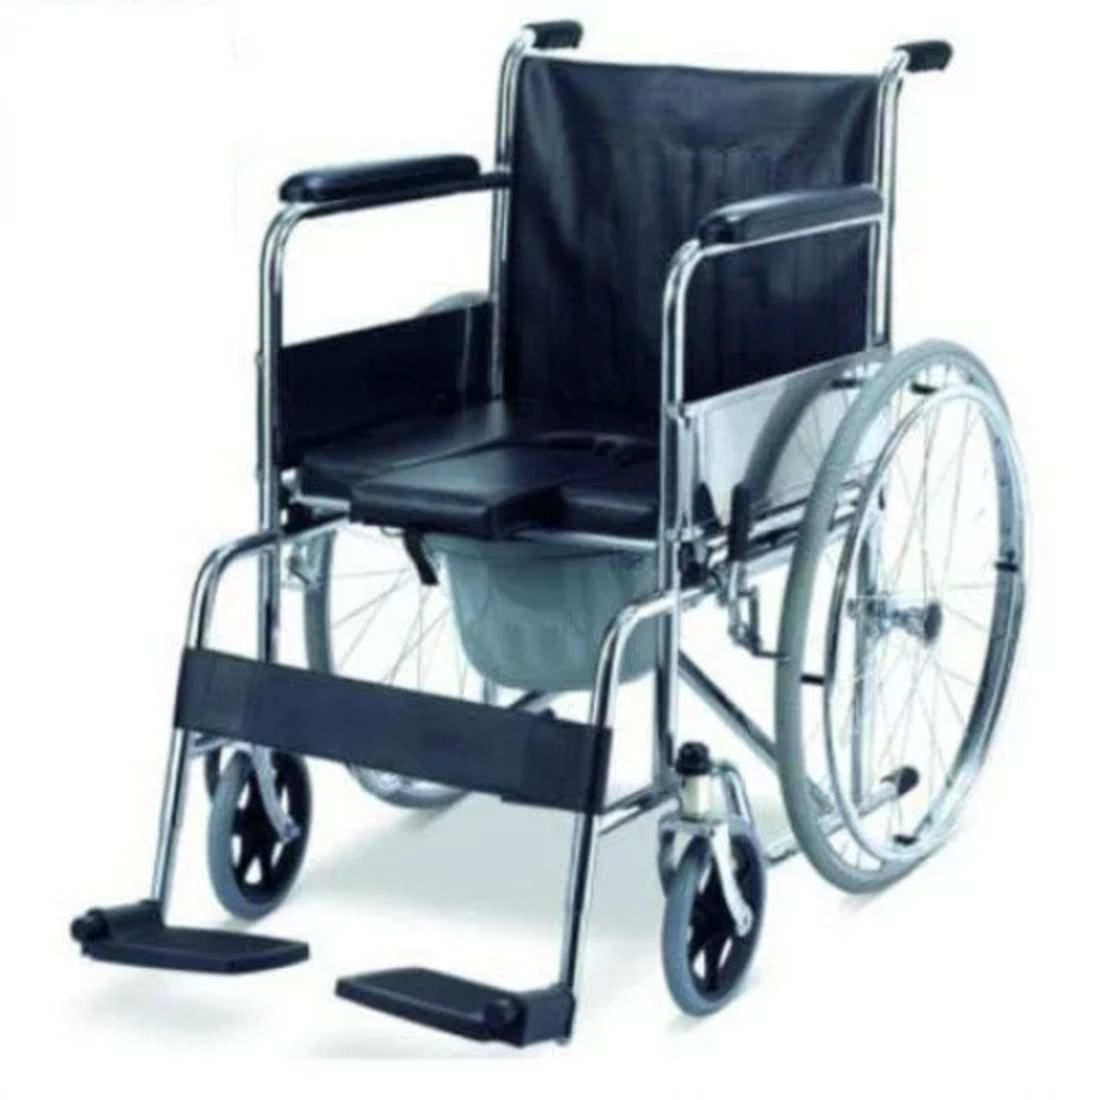 Buy Wheelchair with commode at best price from AeonCare located in Chennai